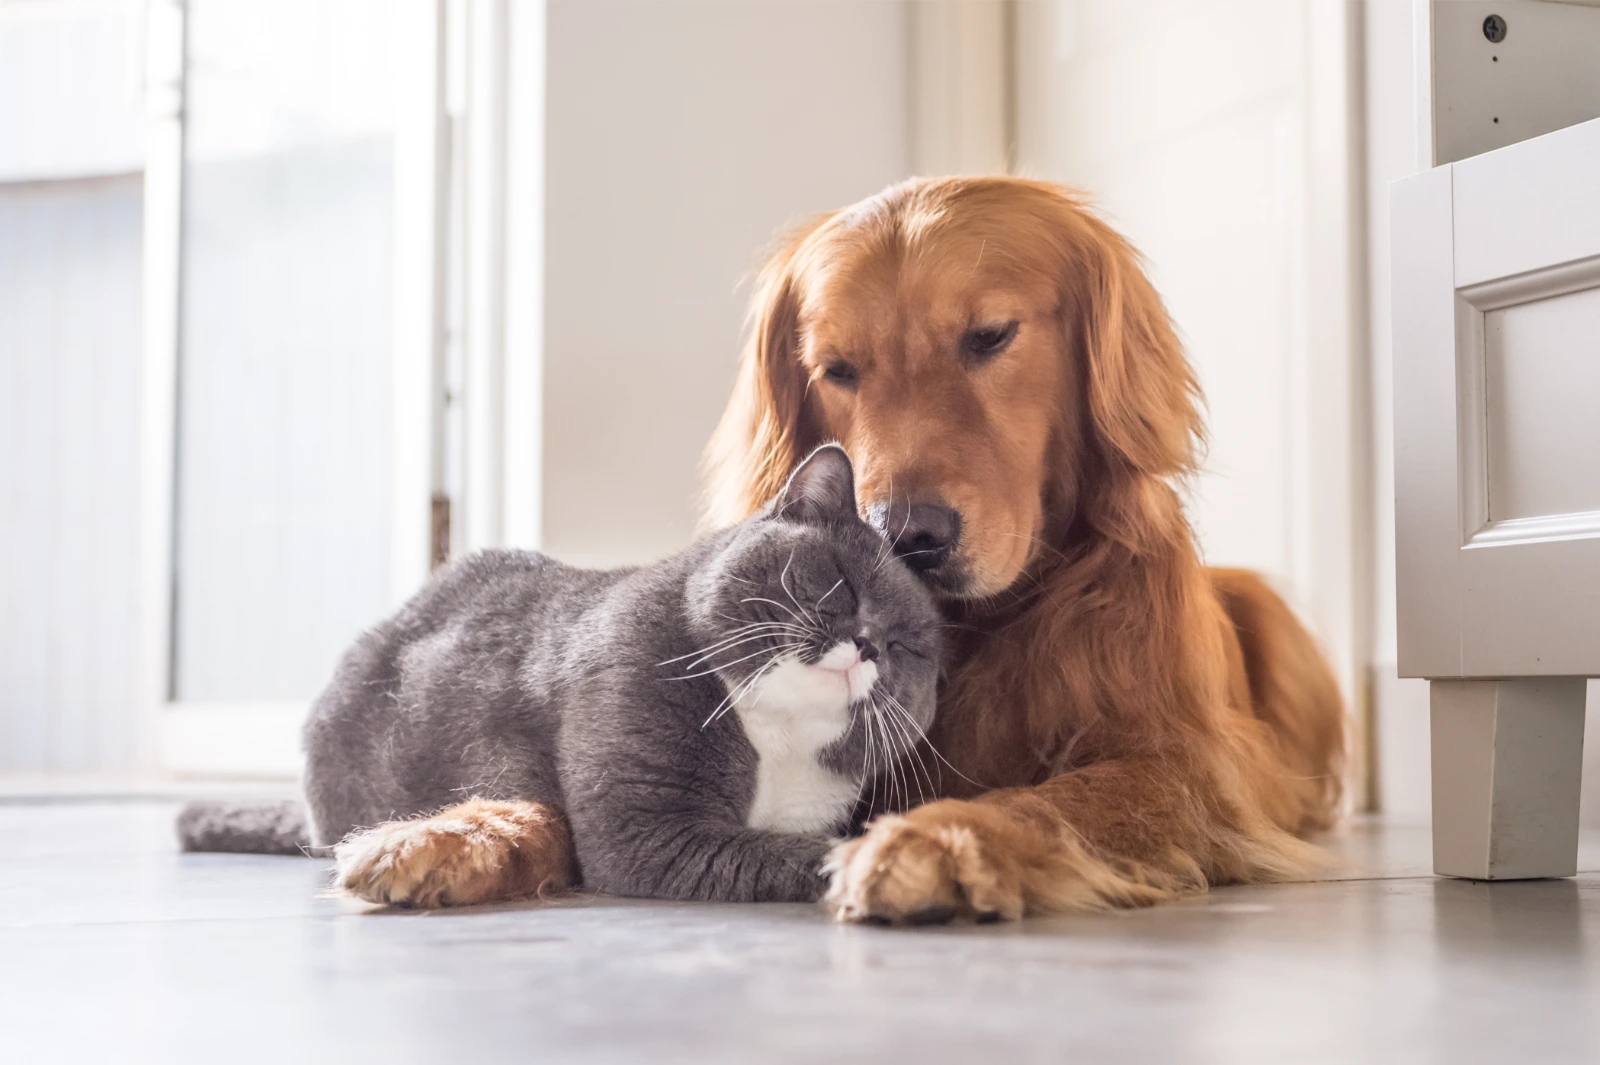 A grey cat a larger golden retriever cuddled together on holiday after being issued an animal health certificate